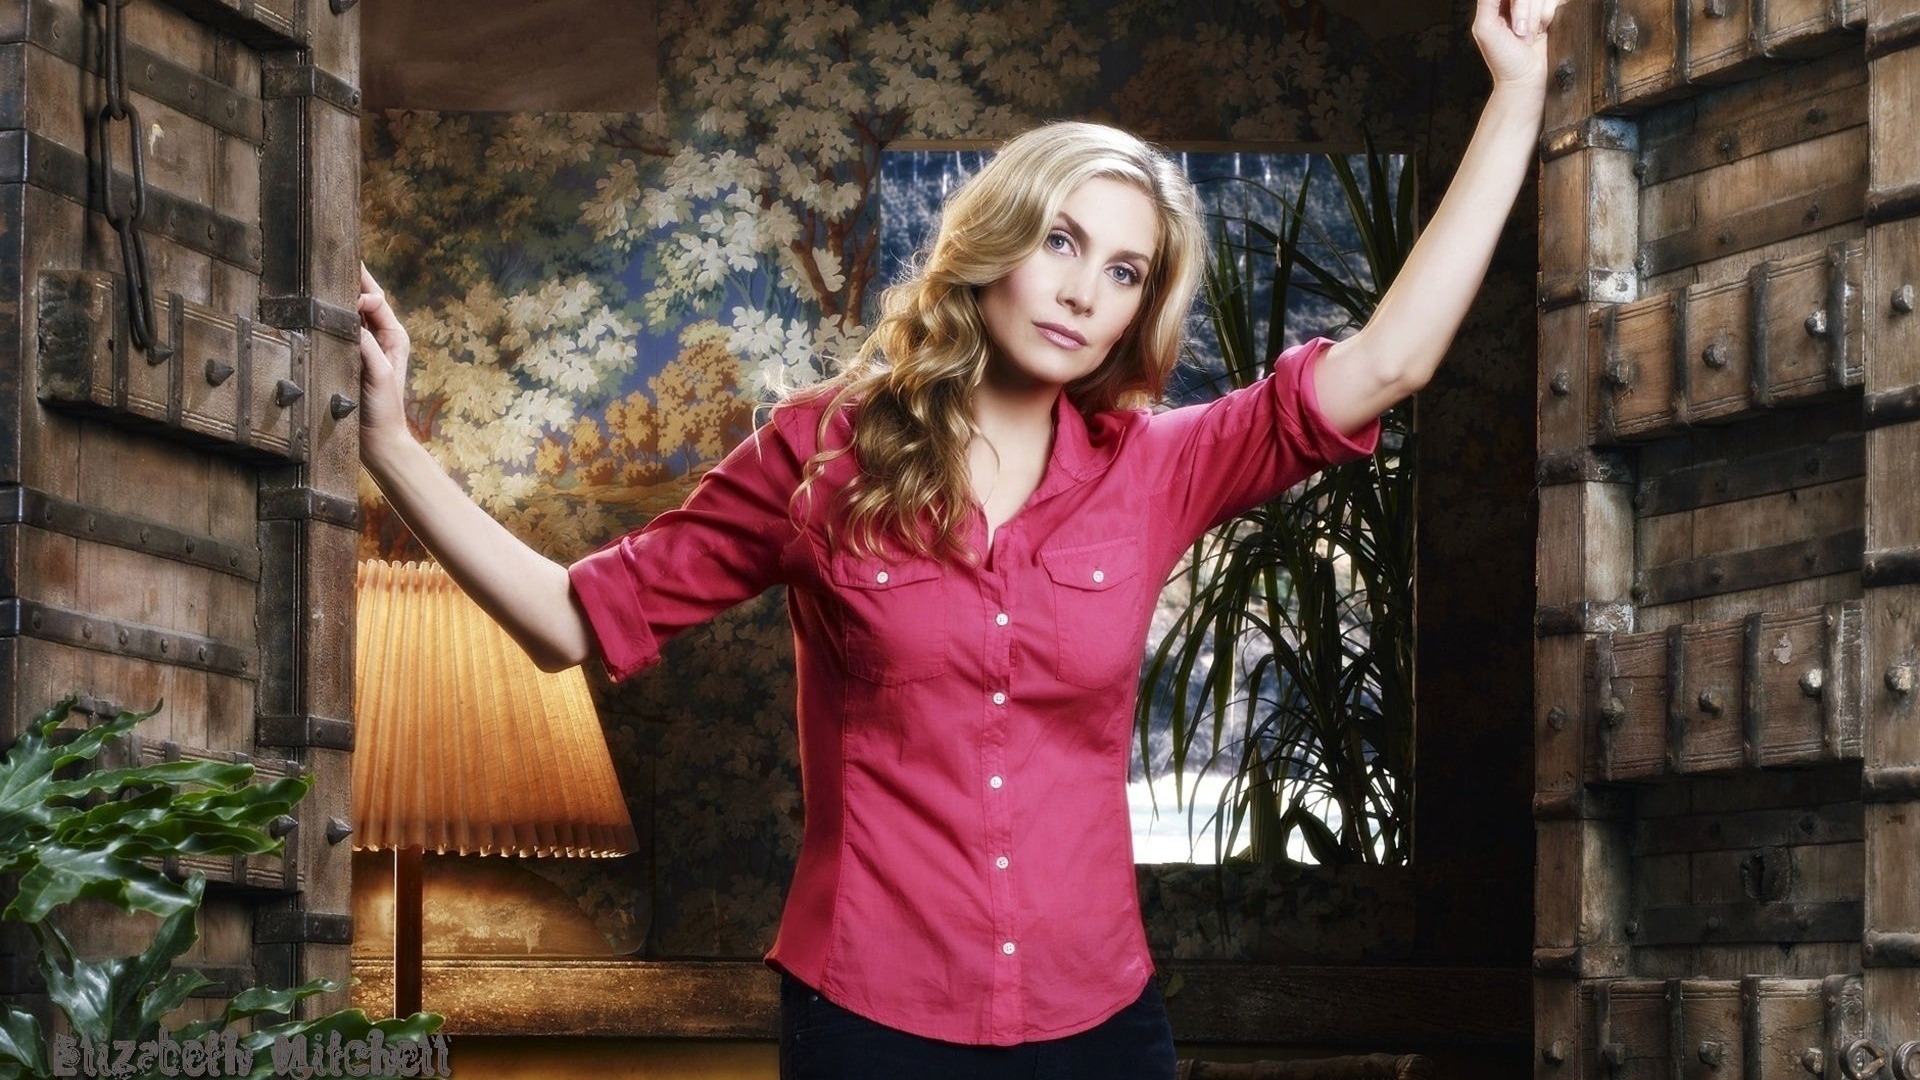 Elizabeth Mitchell #011 - 1920x1080 Wallpapers Pictures Photos Images